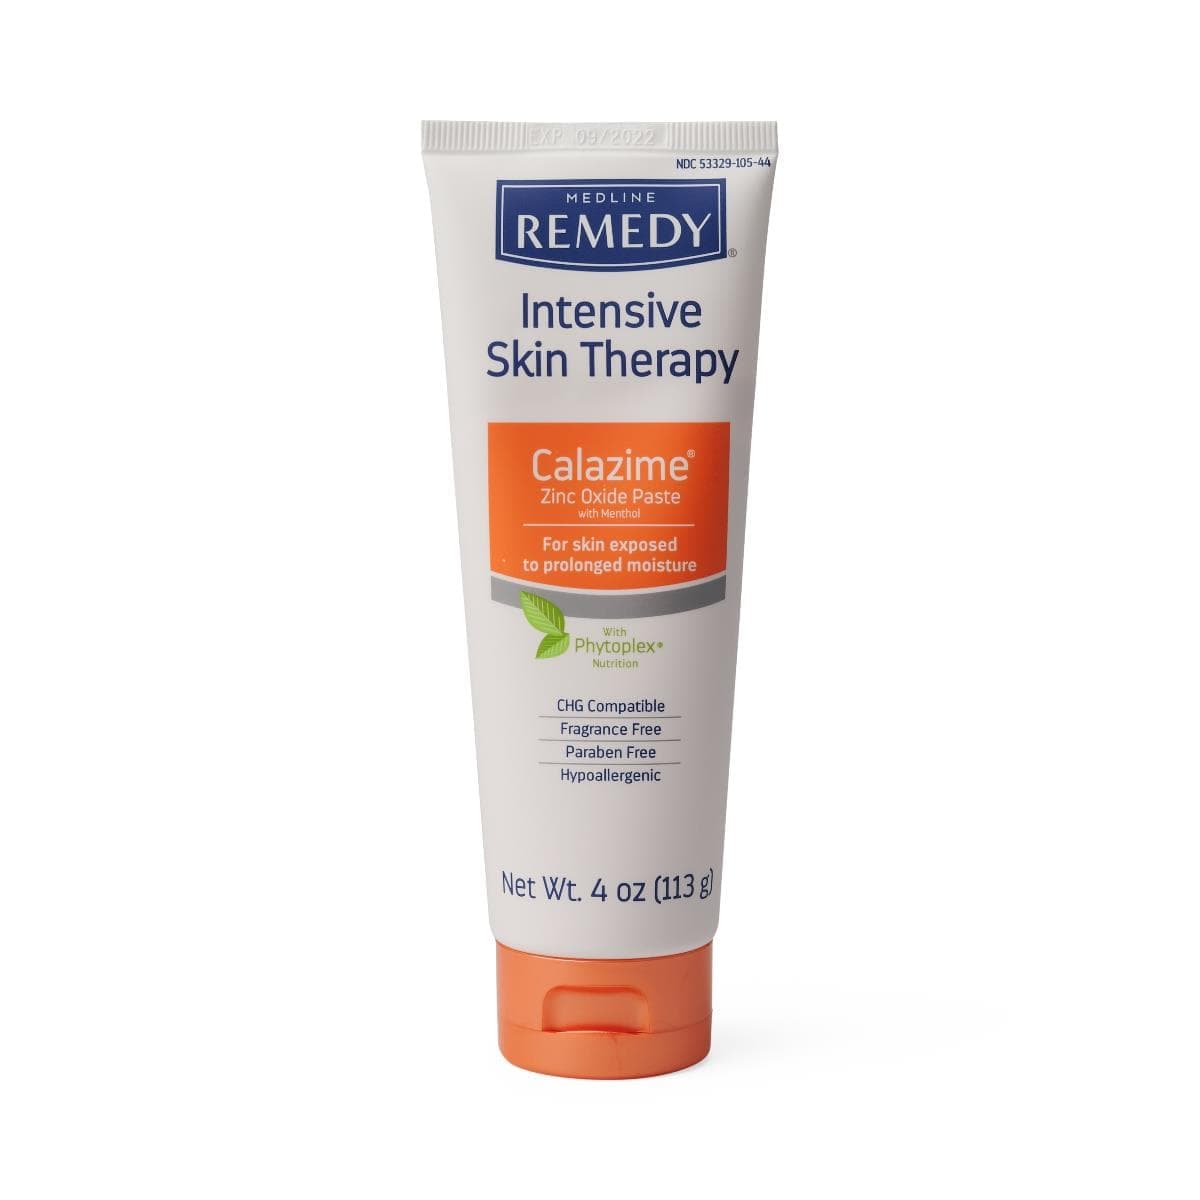 Medline Remedy Intensive Skin Therapy Calazime Skin Protectant